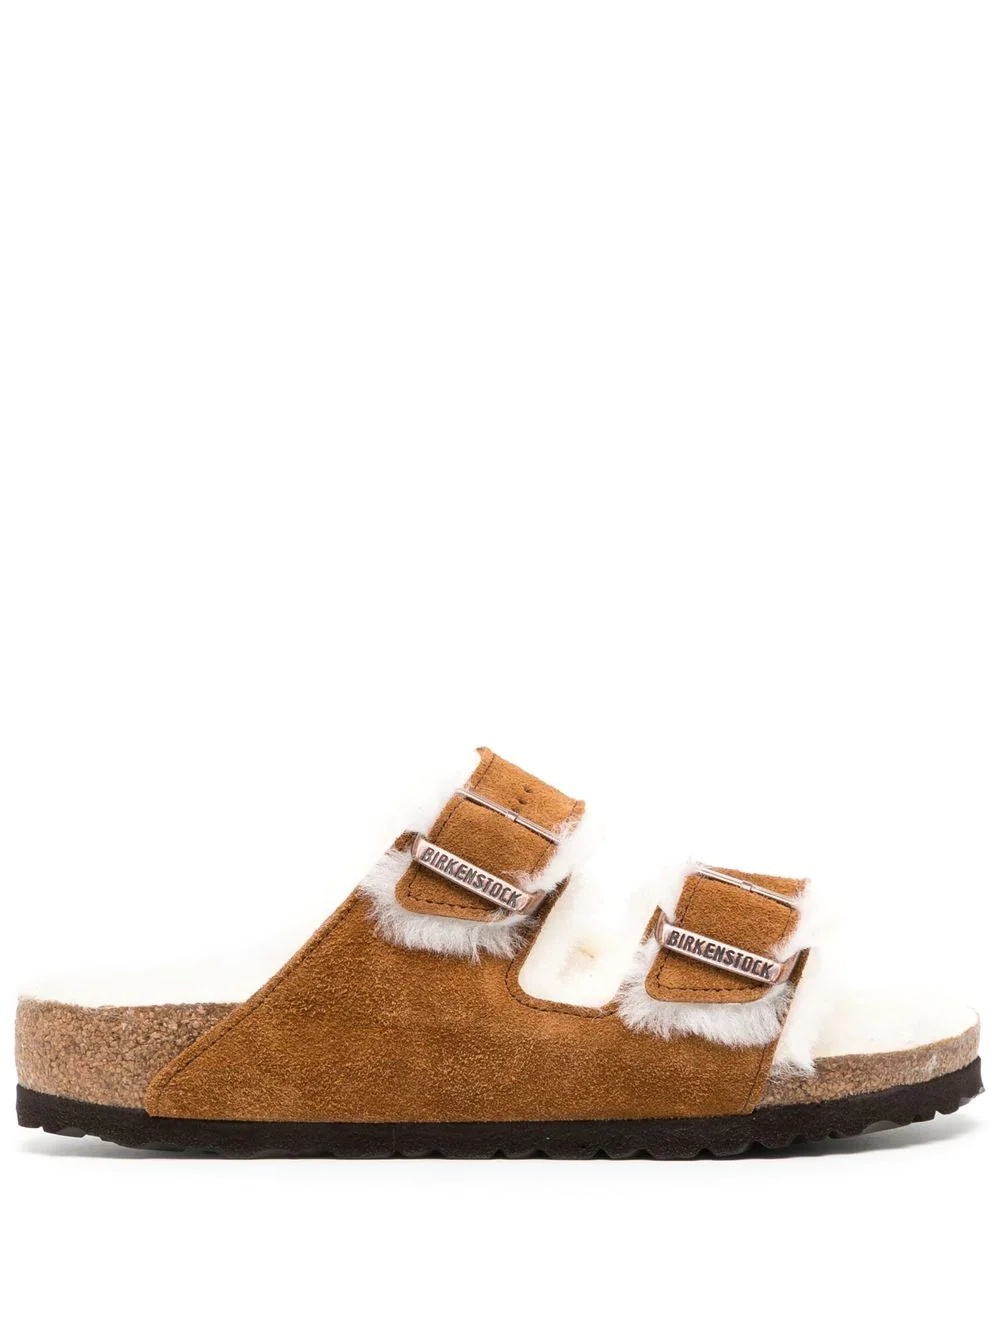 shearling-lined slip-on sandals - 1